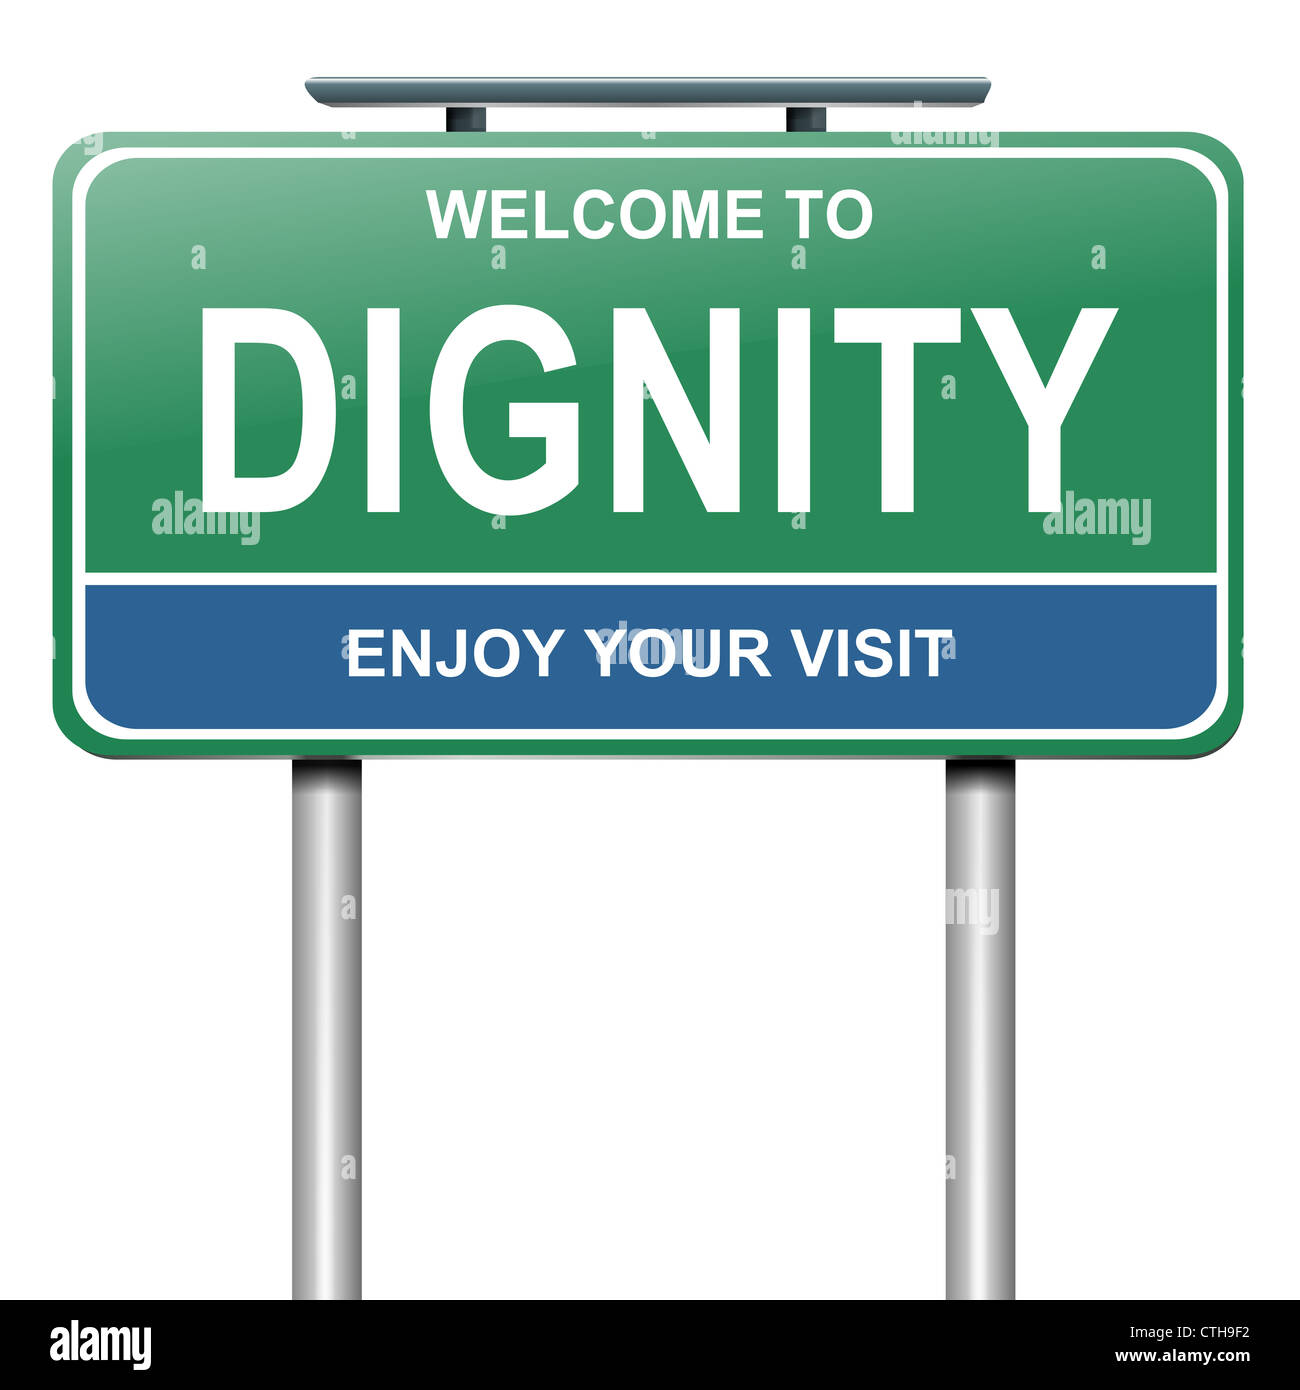 Dignity concept. Stock Photo